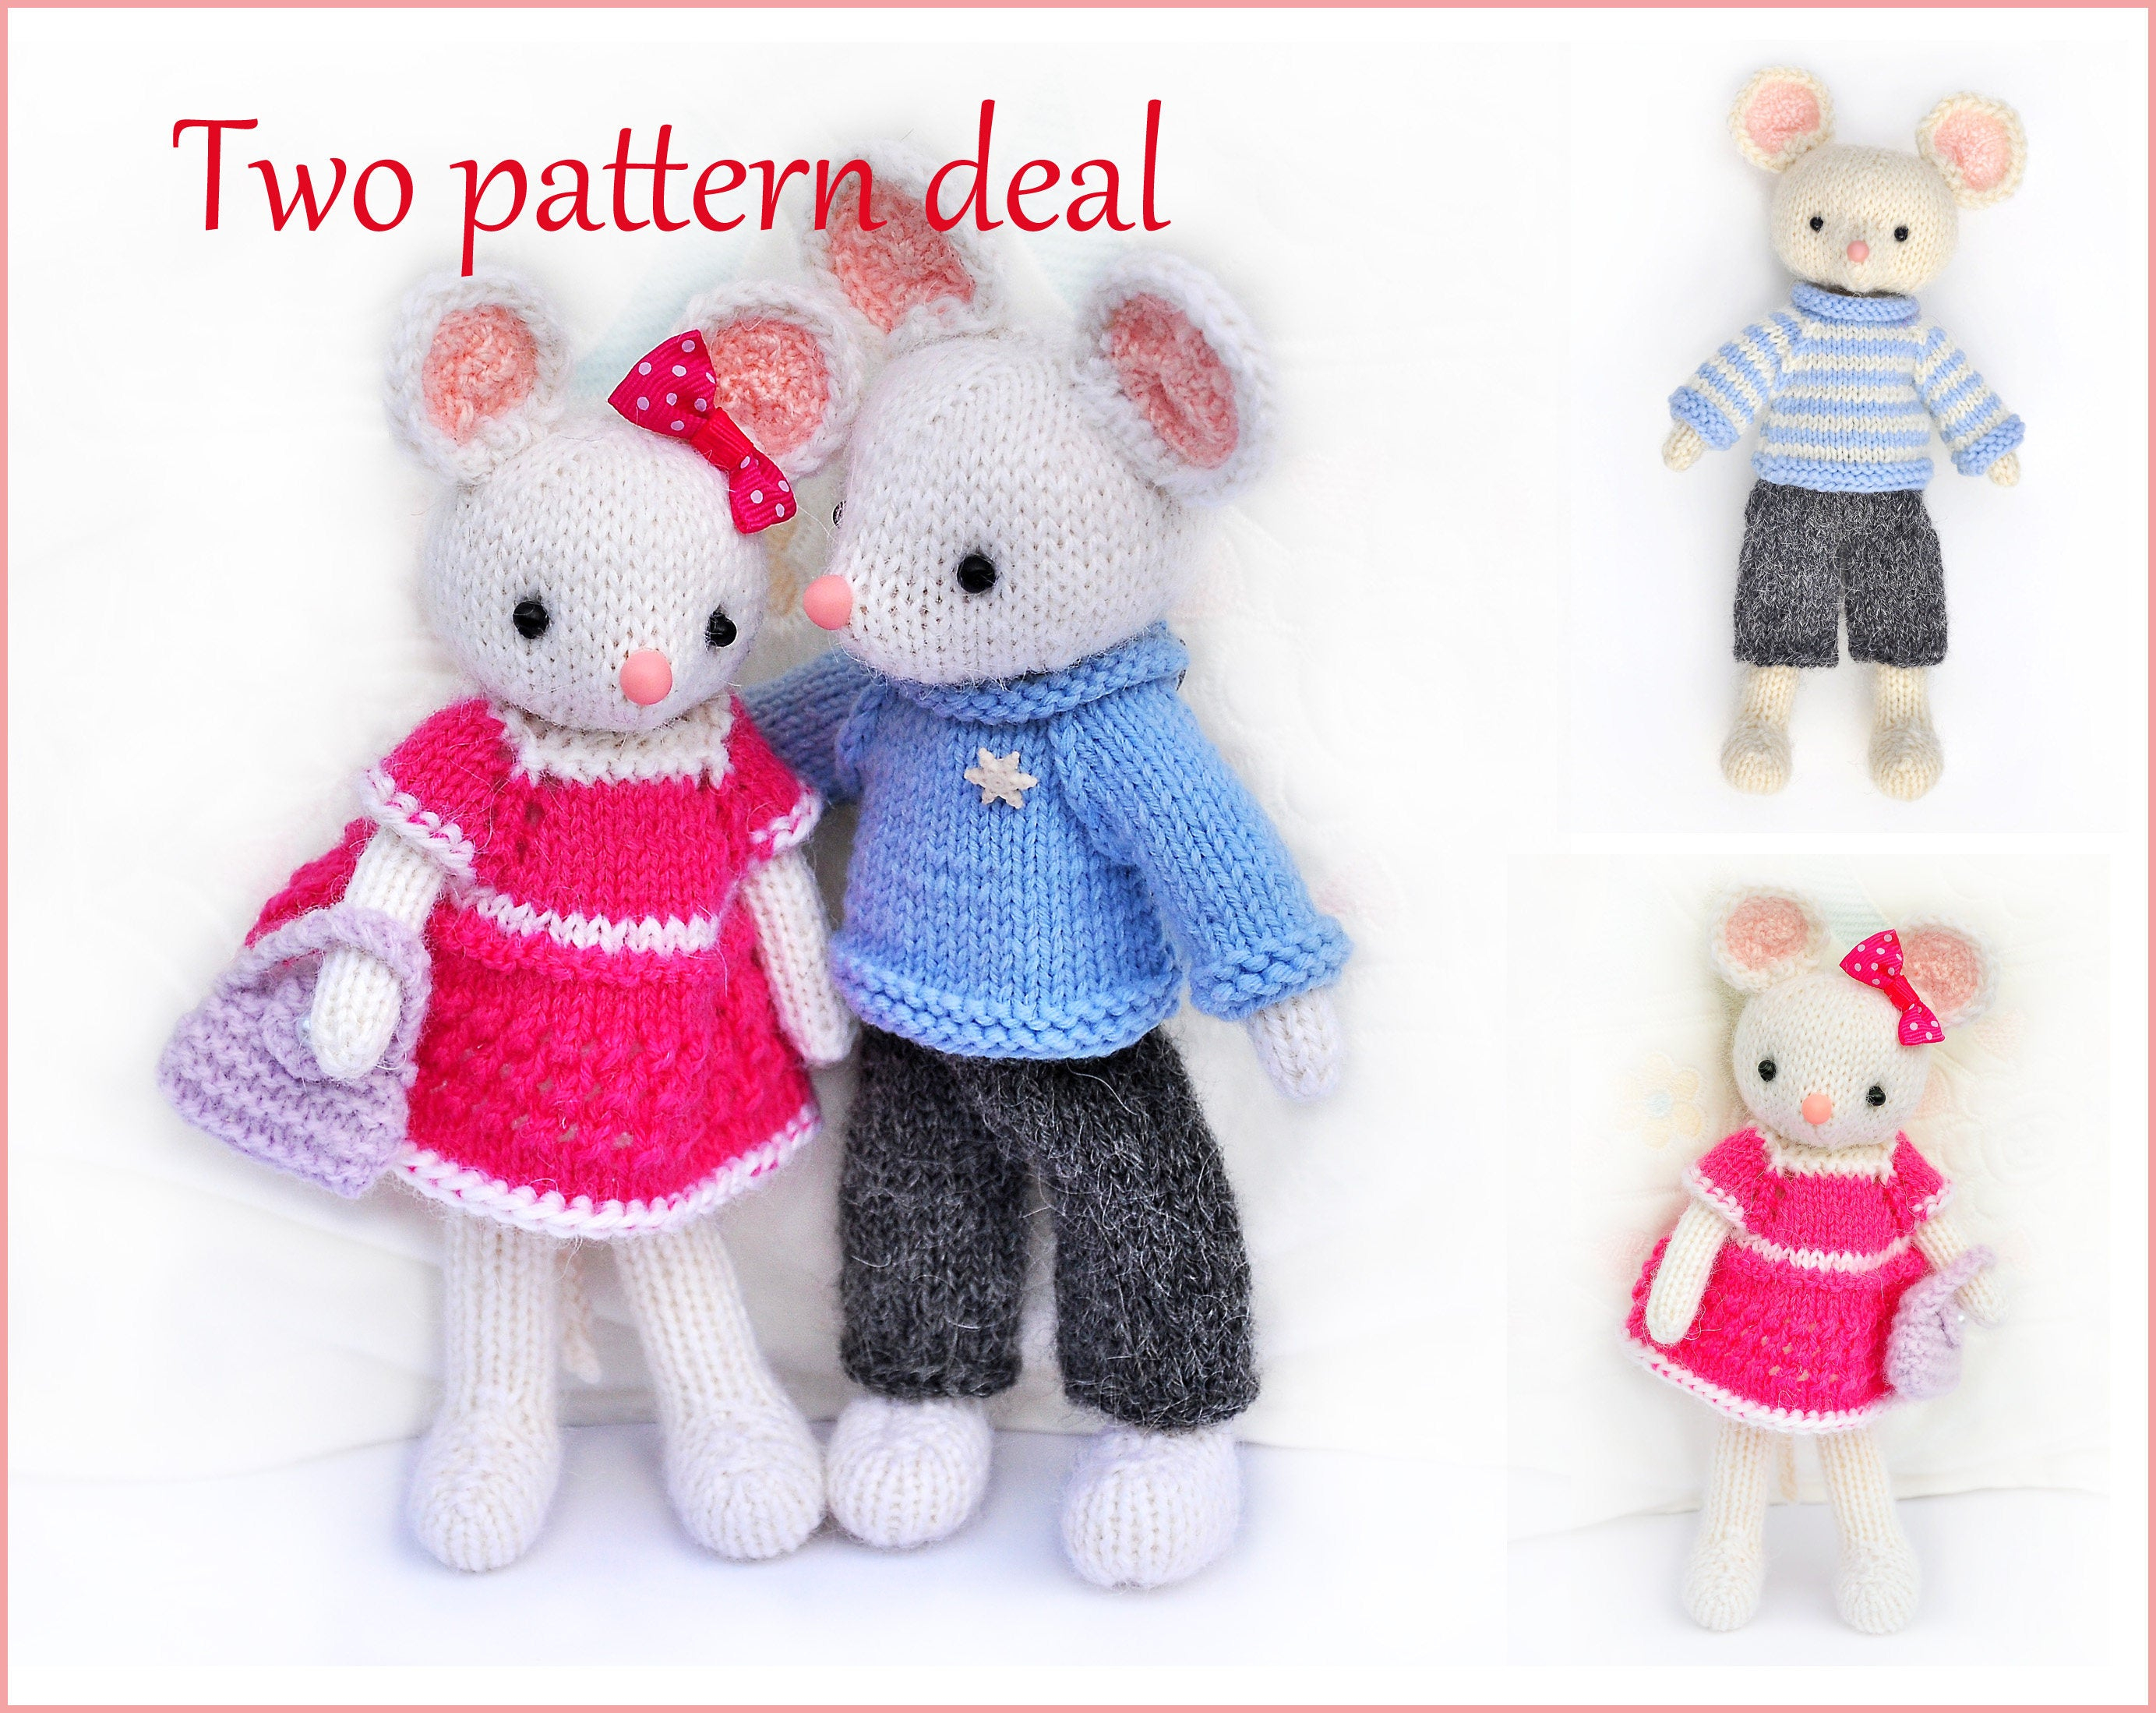 Knitting Patterns For Baby Toys Toy Knitting Patterns Two Pattern Deal Lilly And Peter Knitted Mice Amigurumi Mouse Knit Patterns Stuffed Toy Diy Toy Pattern Ba Toy Pdf